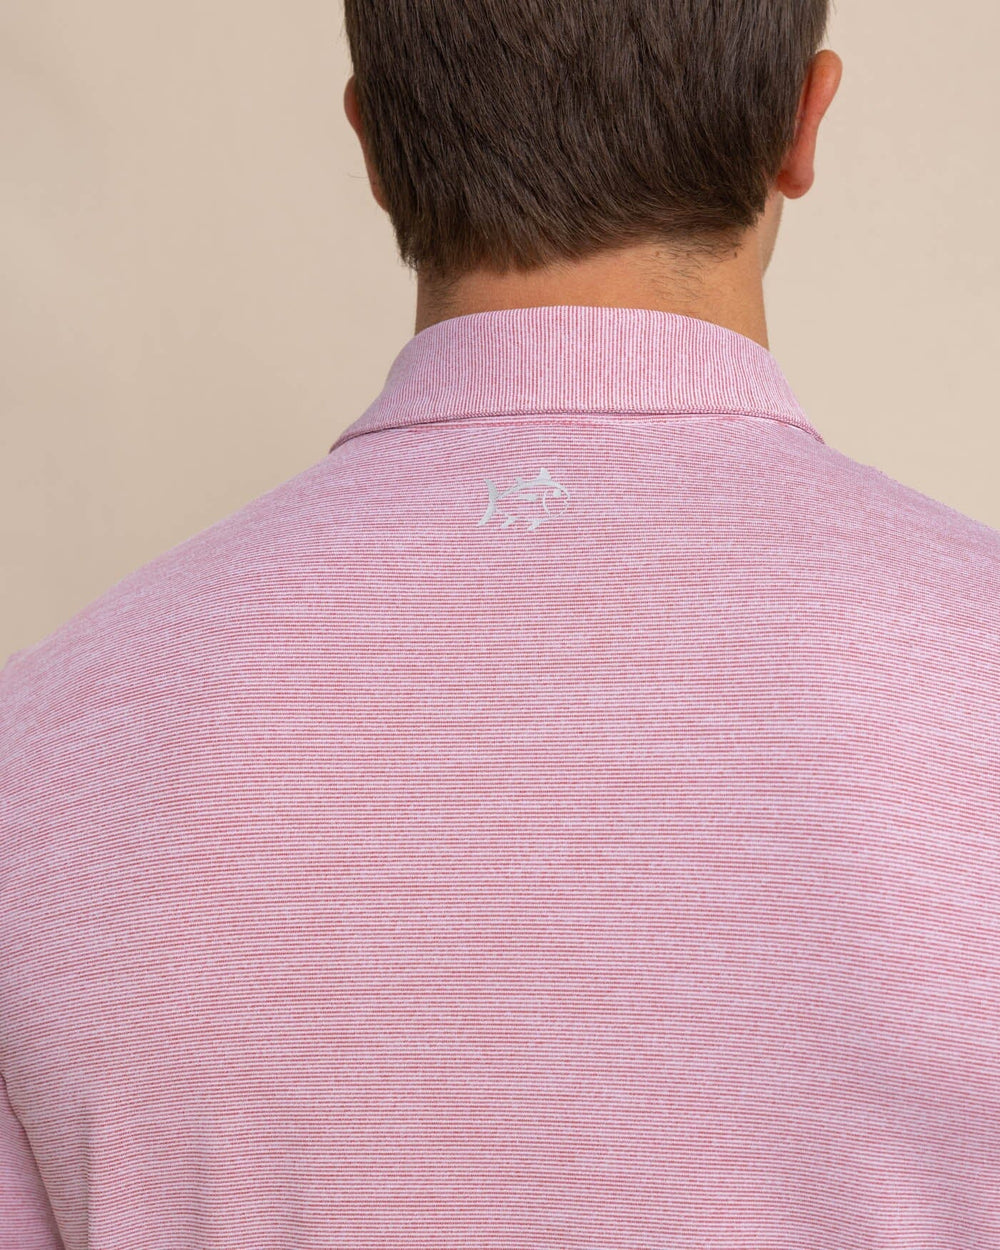 The detail view of the Southern Tide Team Colors Driver Spacedye Polo Shirt by Southern Tide - Crimson